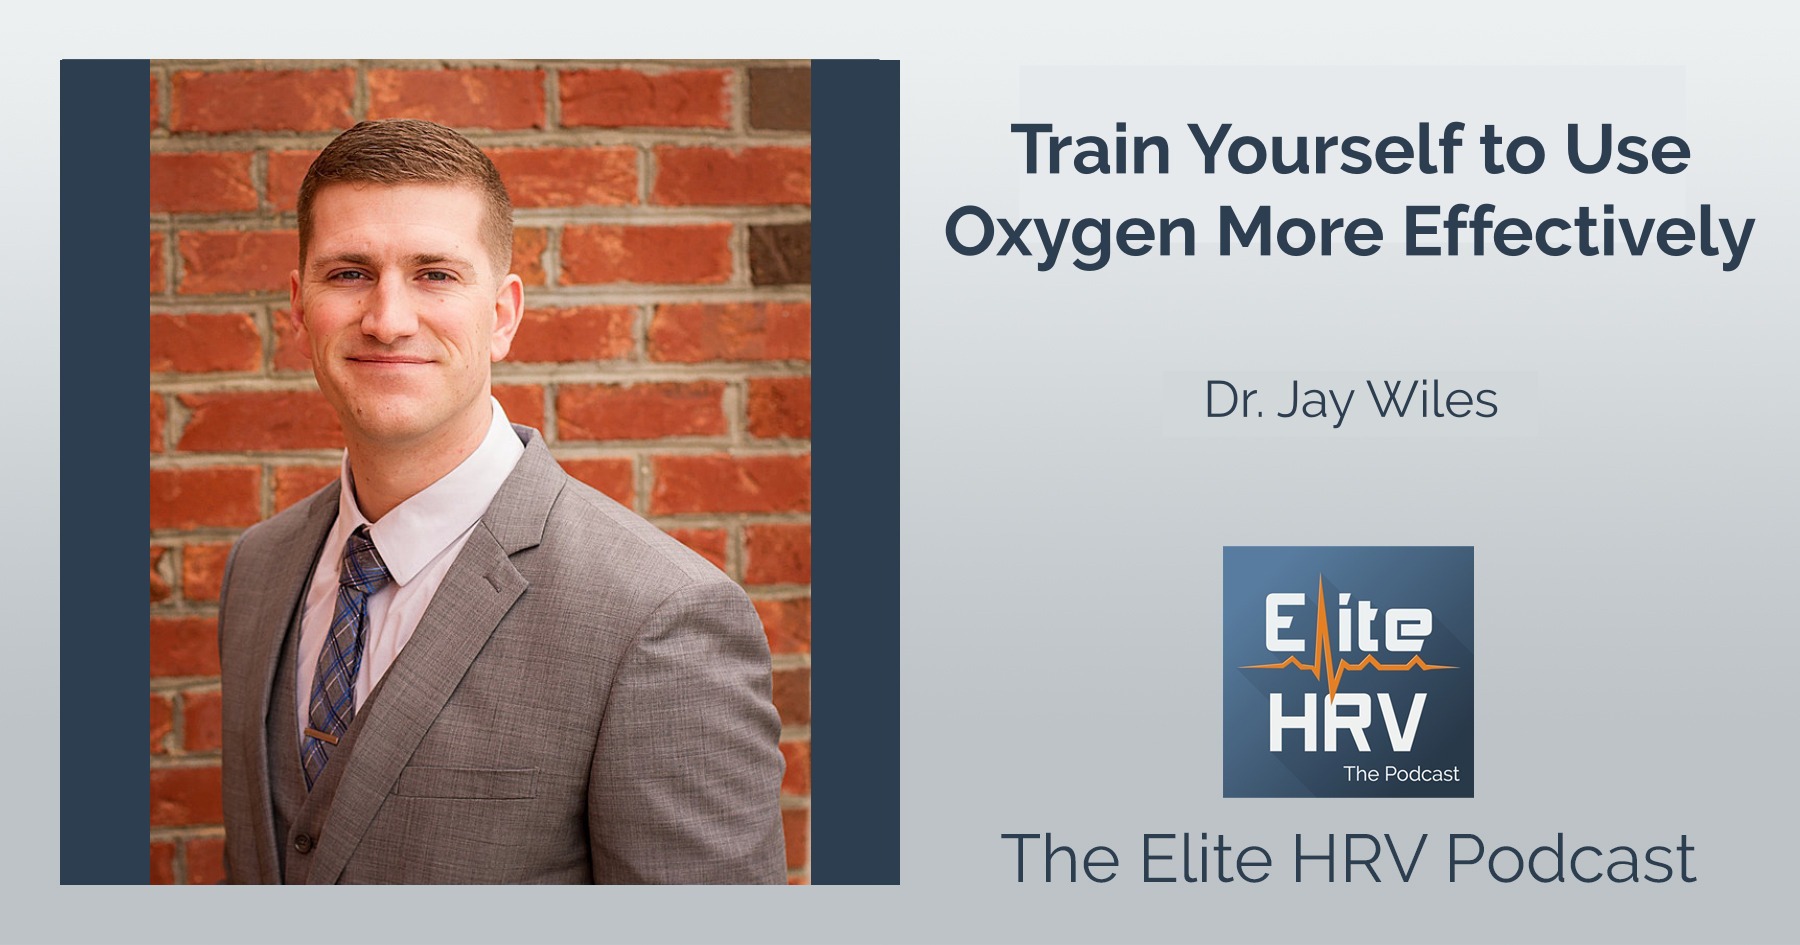 Train Yourself to Use Oxygen More Effectively